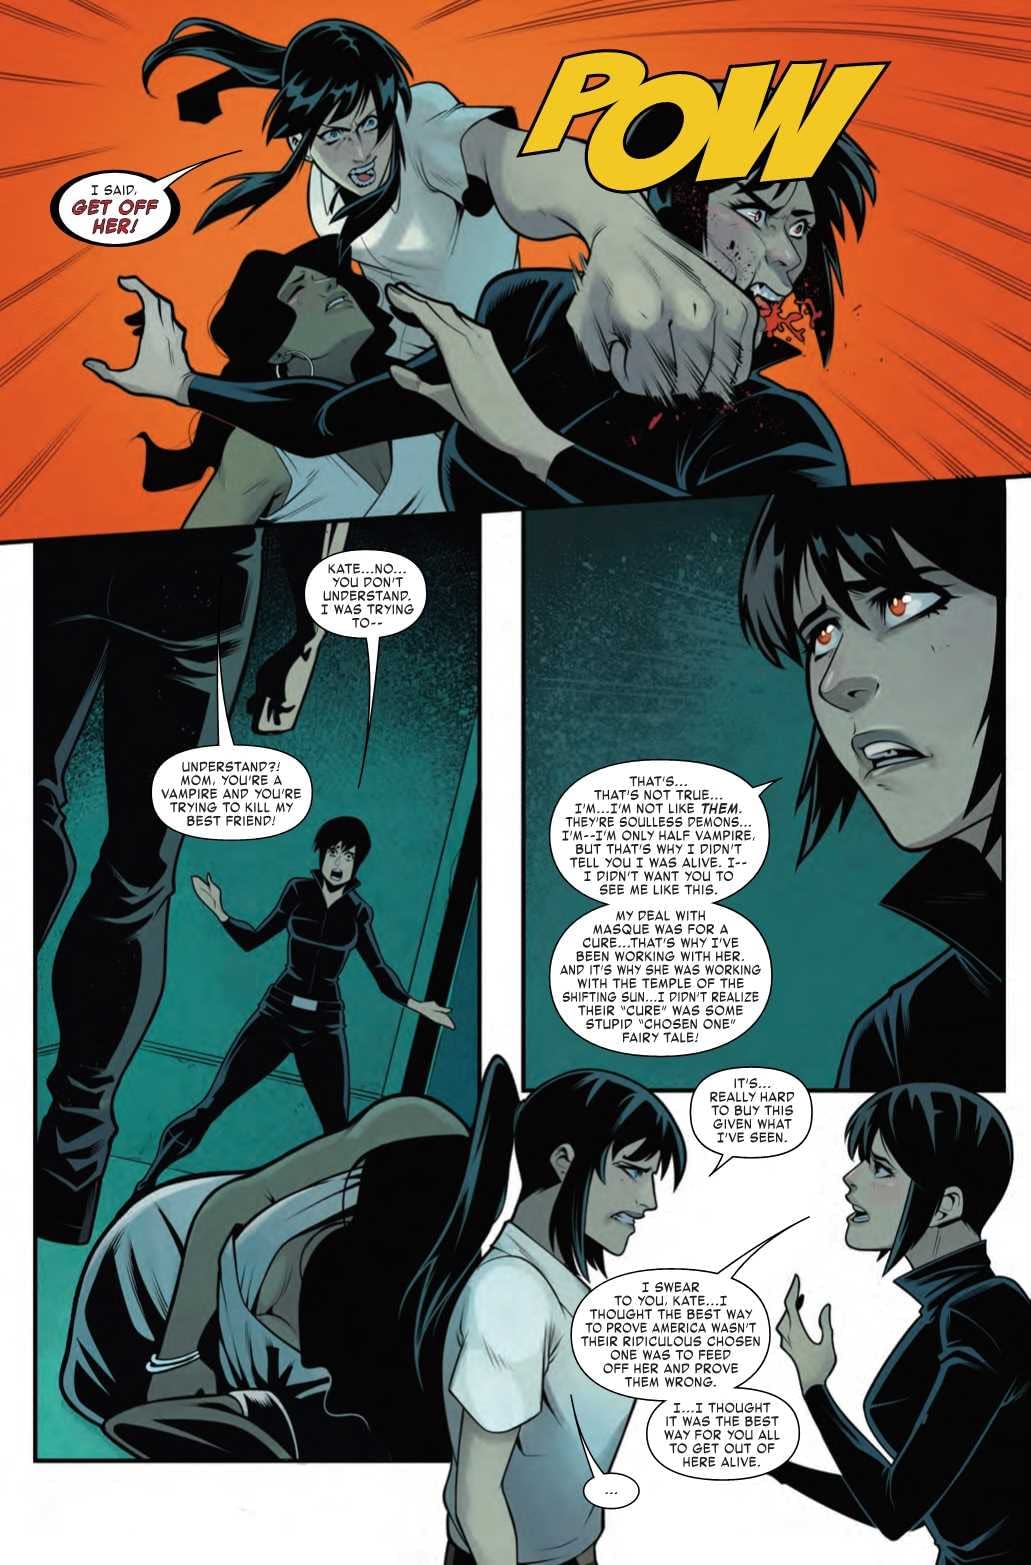 Why You Should Never Trust a Half-Vampire, Even if She's Your Mom - West Coast Avengers #10 Preview